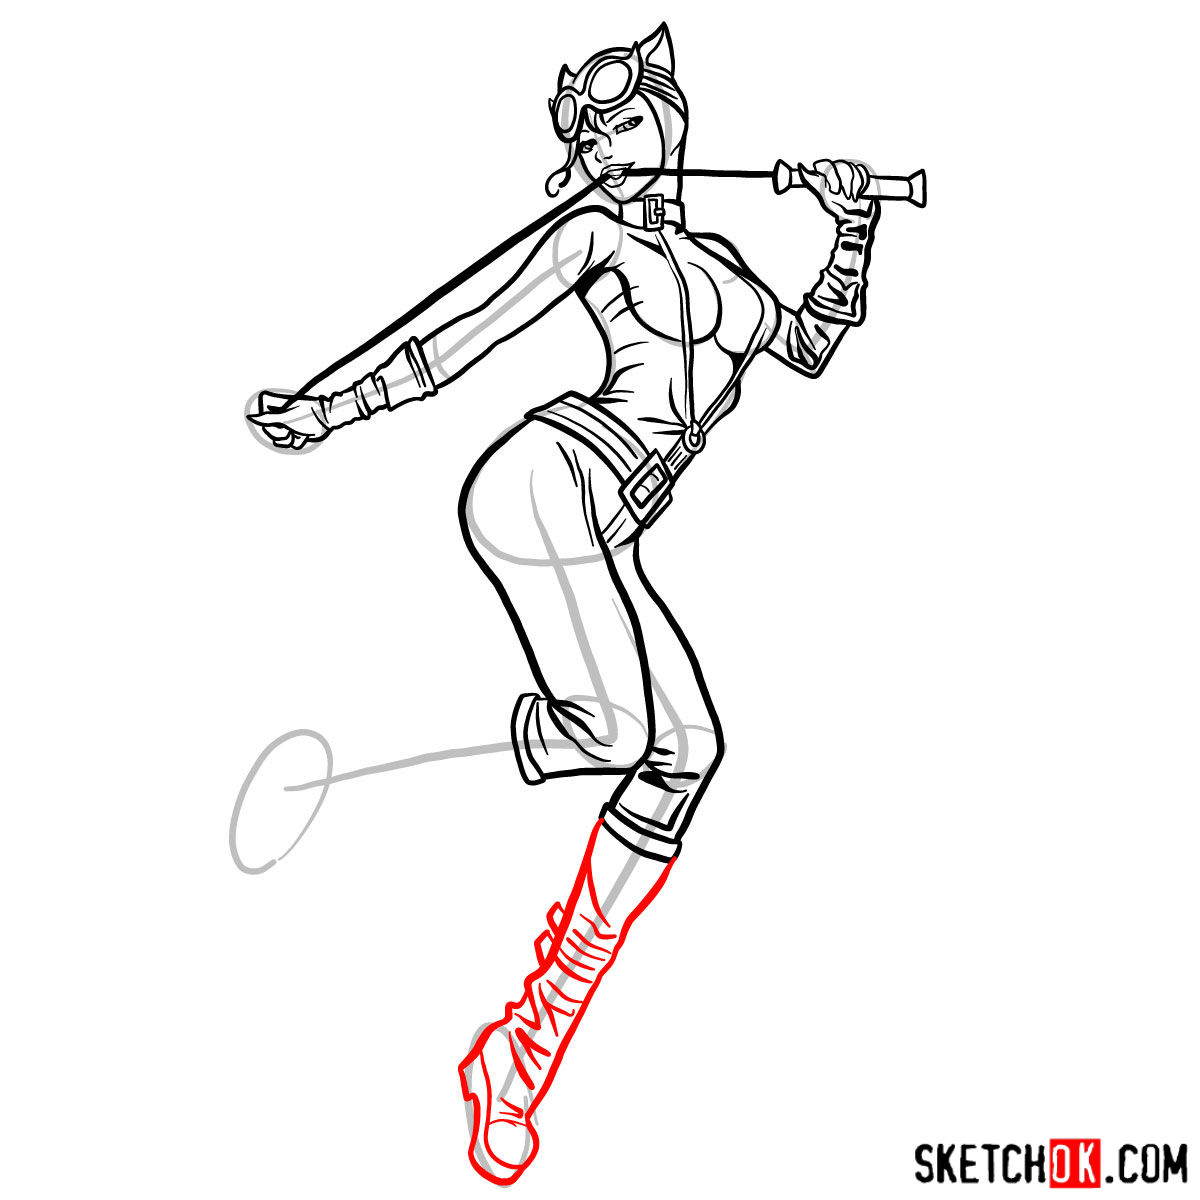 How to draw Catwoman superheroine from DC Comics - step 15